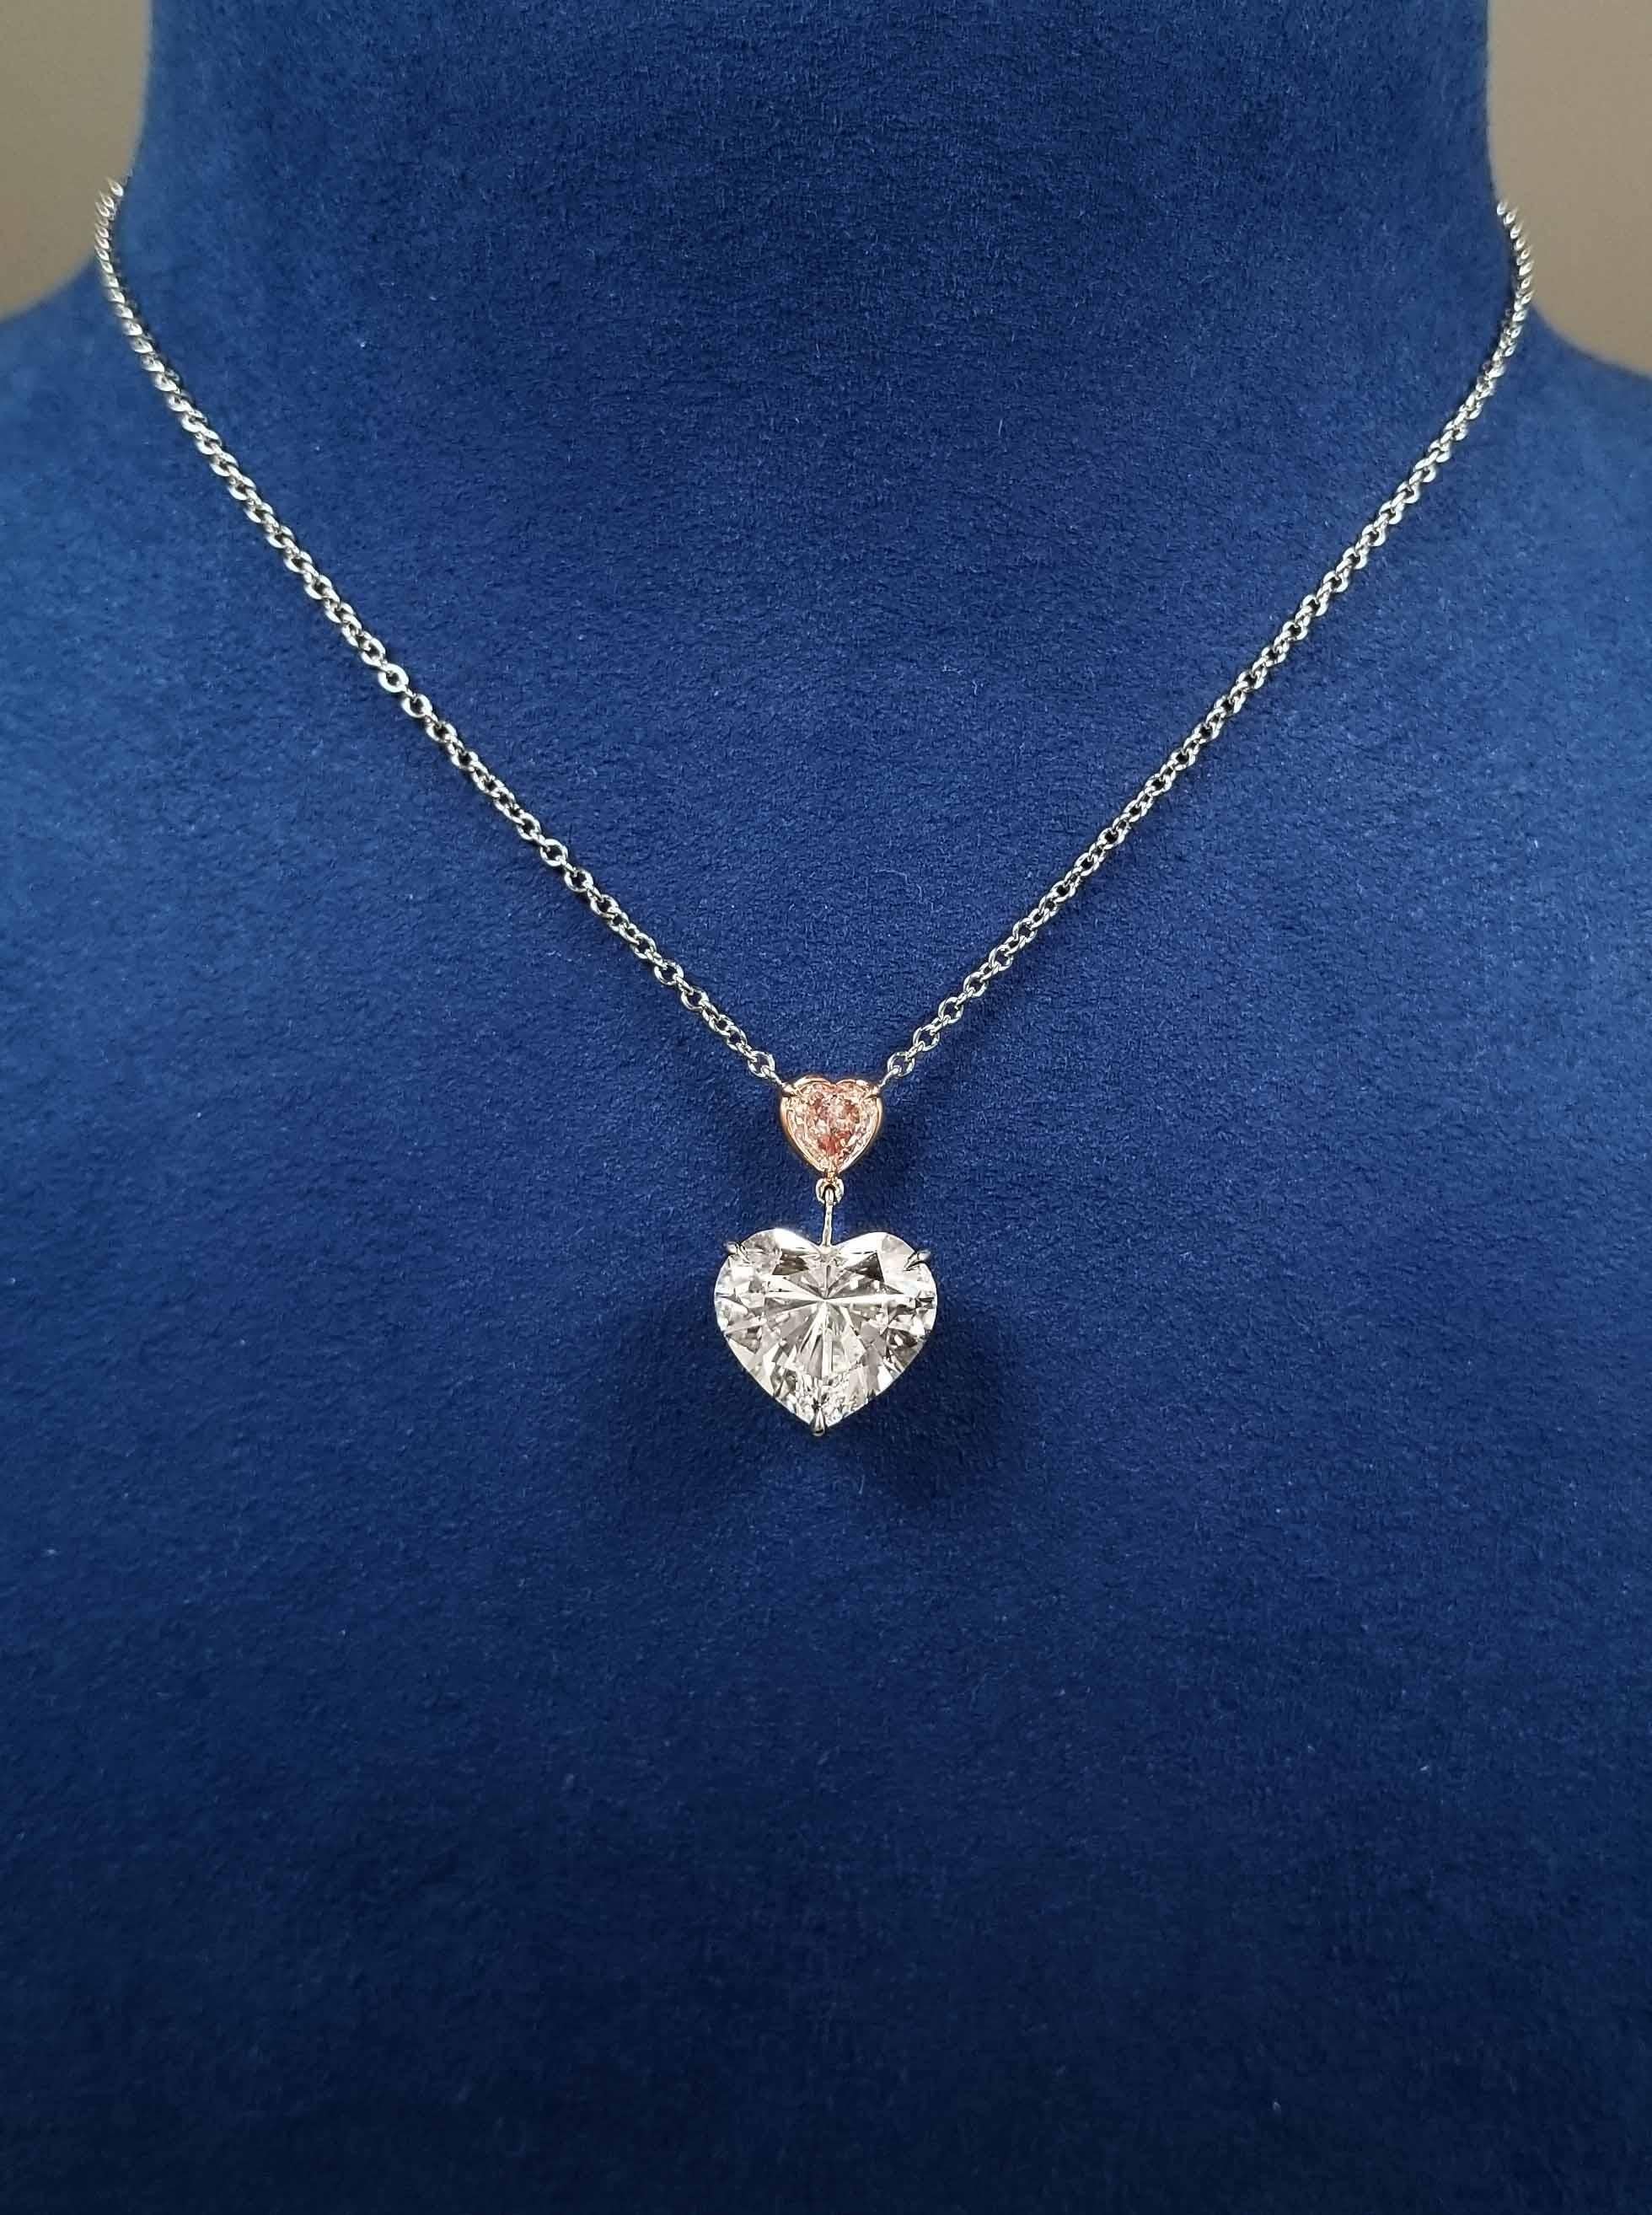 Heart Cut SCARSELLI 7 Carat White Heart Diamond Necklace GIA Certified